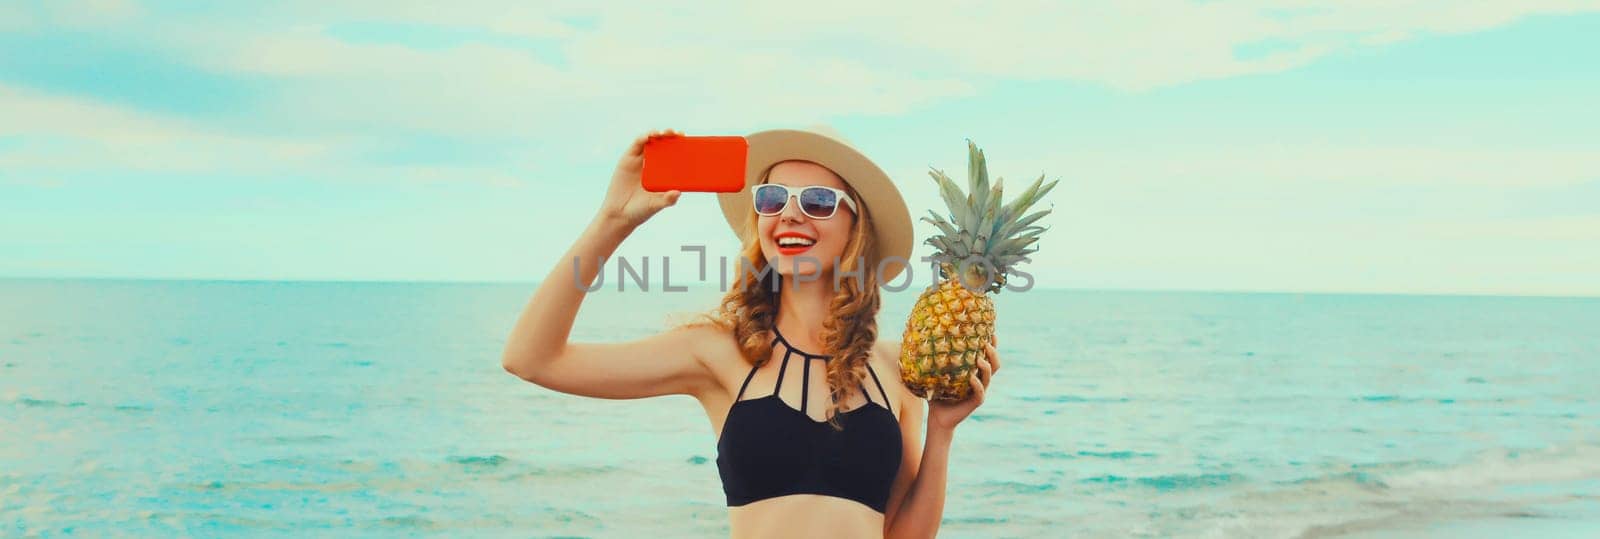 Summer vacation, happy smiling young woman holding pineapple taking selfie with smartphone wearing bikini swimsuit and straw hat on the beach on sea coast background